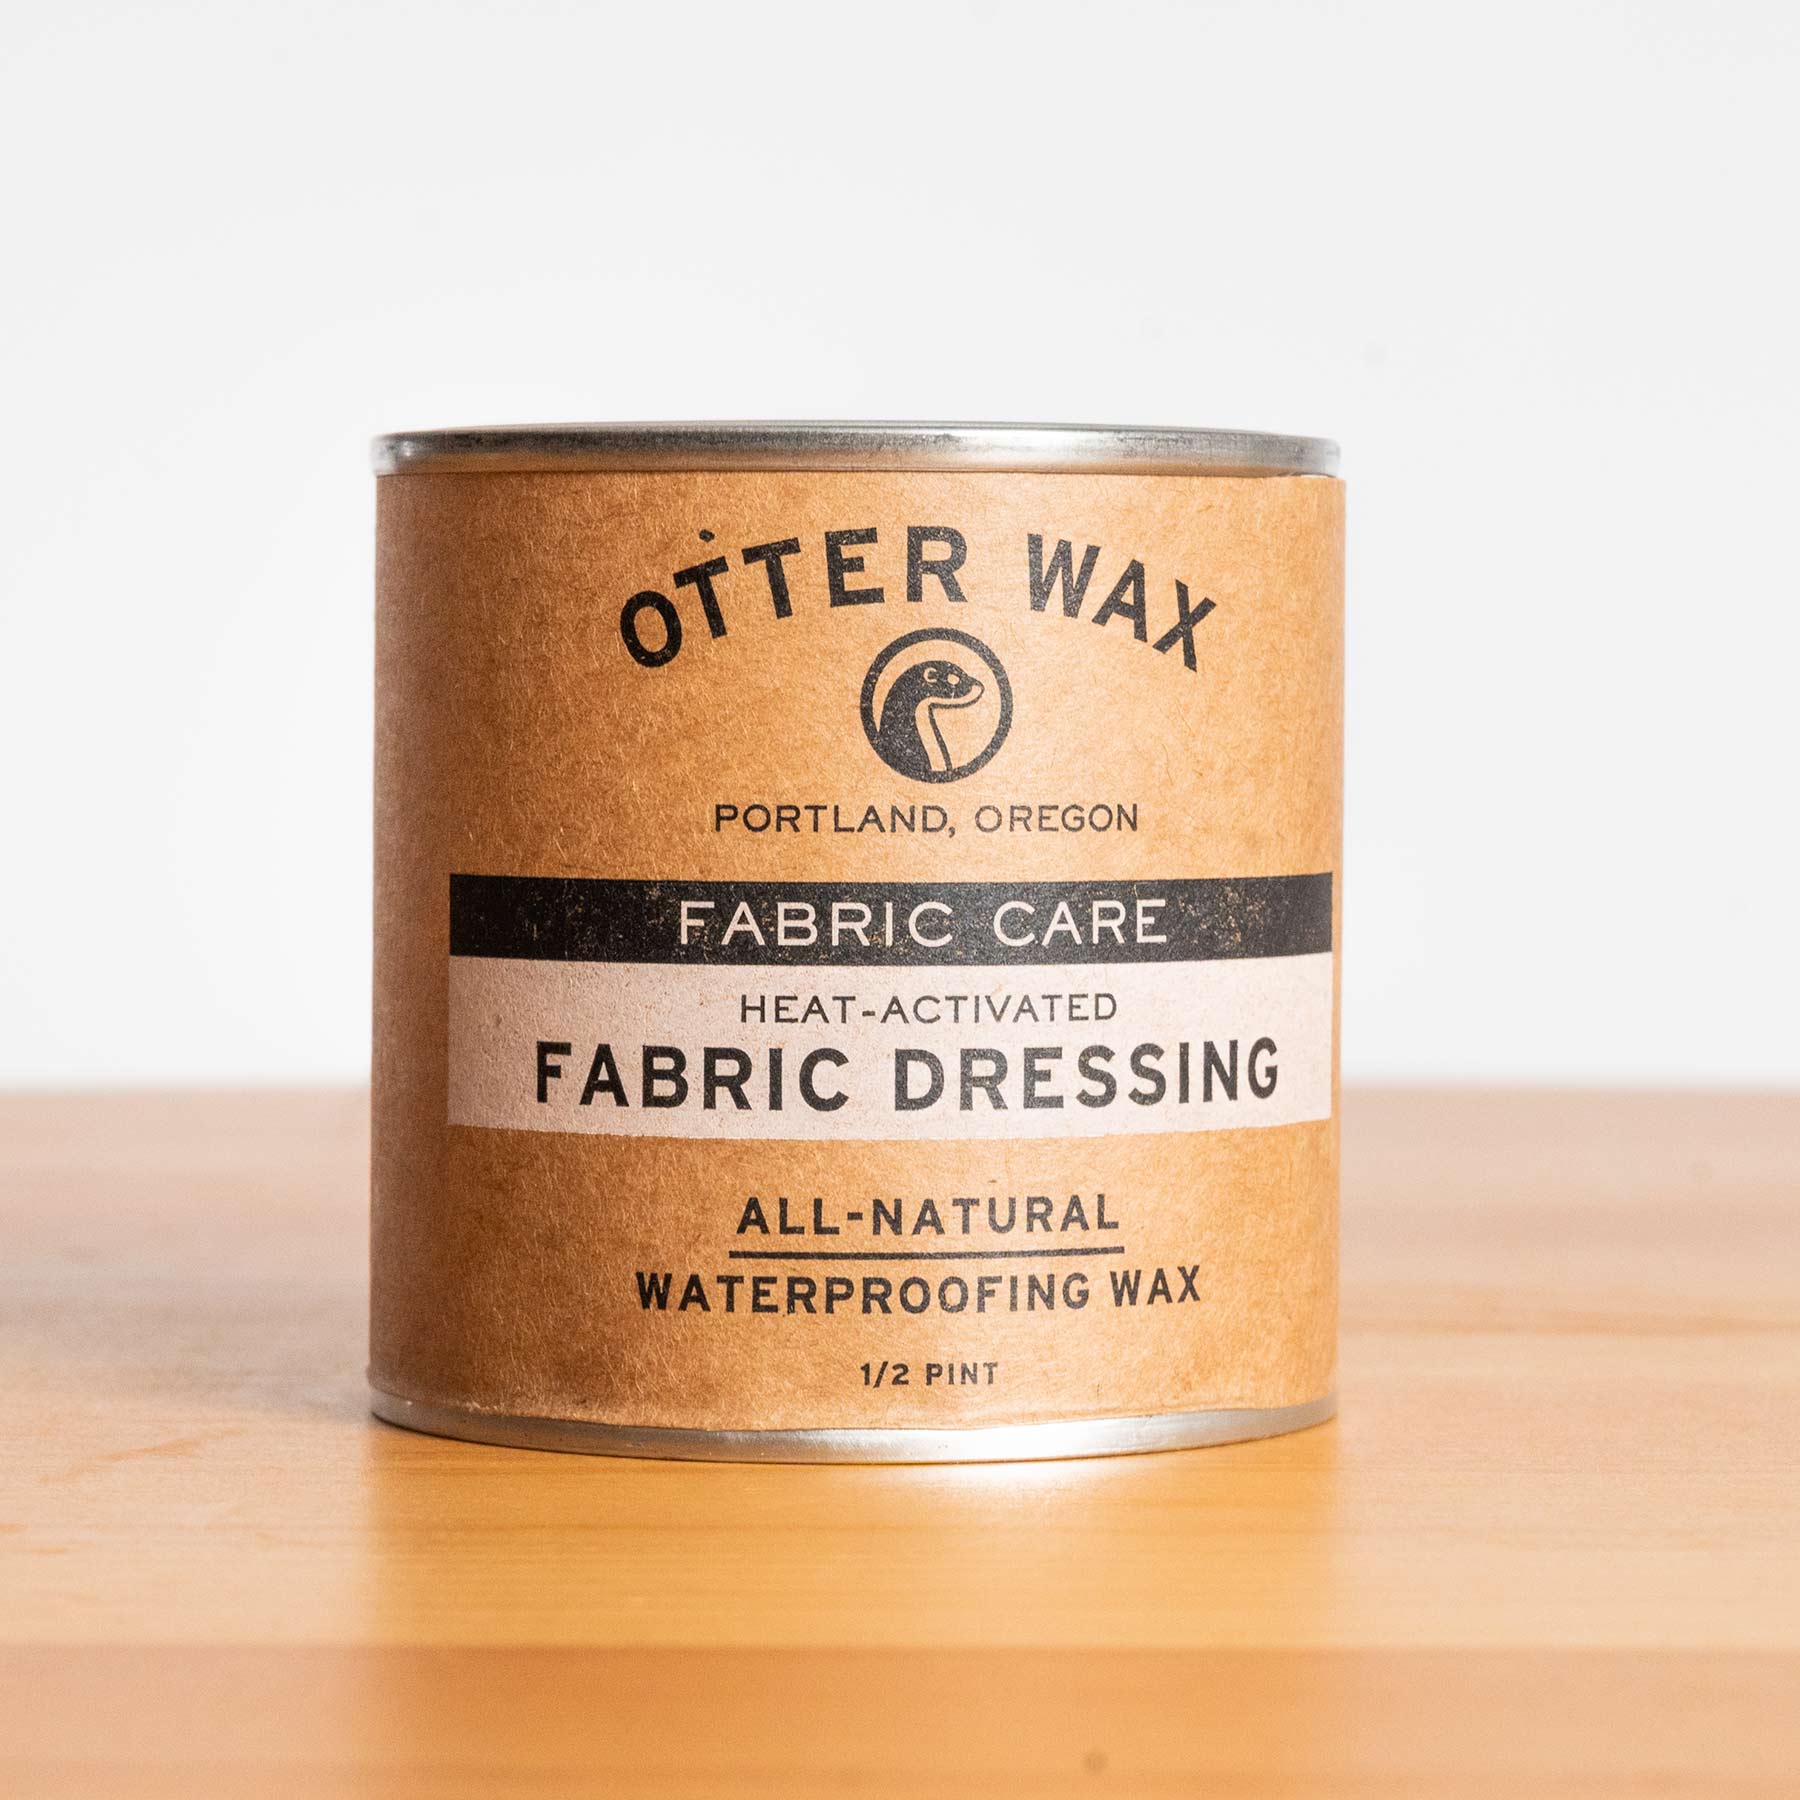  Otter Wax Heat-Activated Fabric Dressing, 1/2 Pint, All-Natural Water Repellent